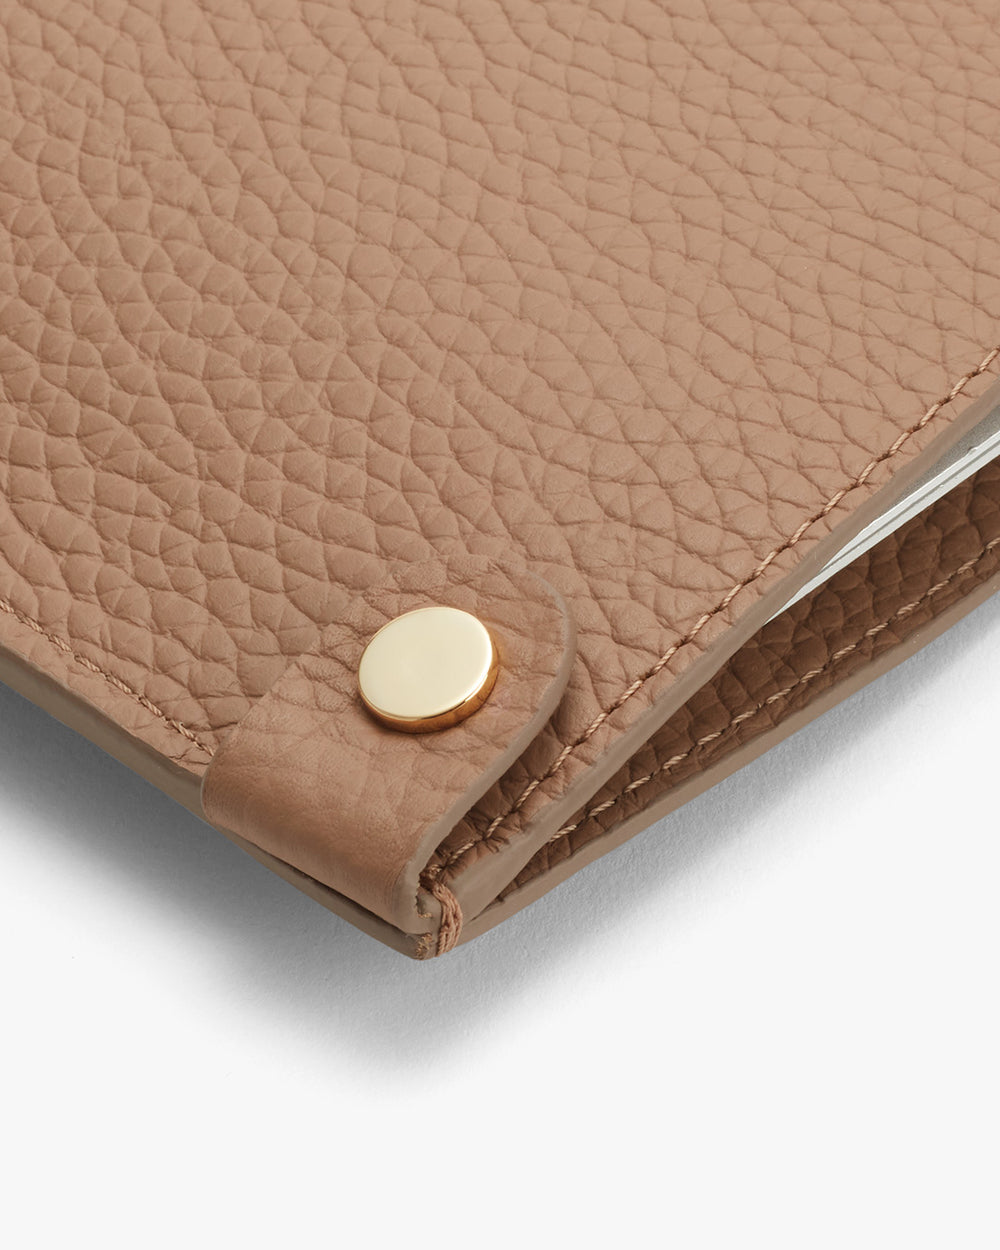 Close-up view of a textured wallet with a metal snap closure.